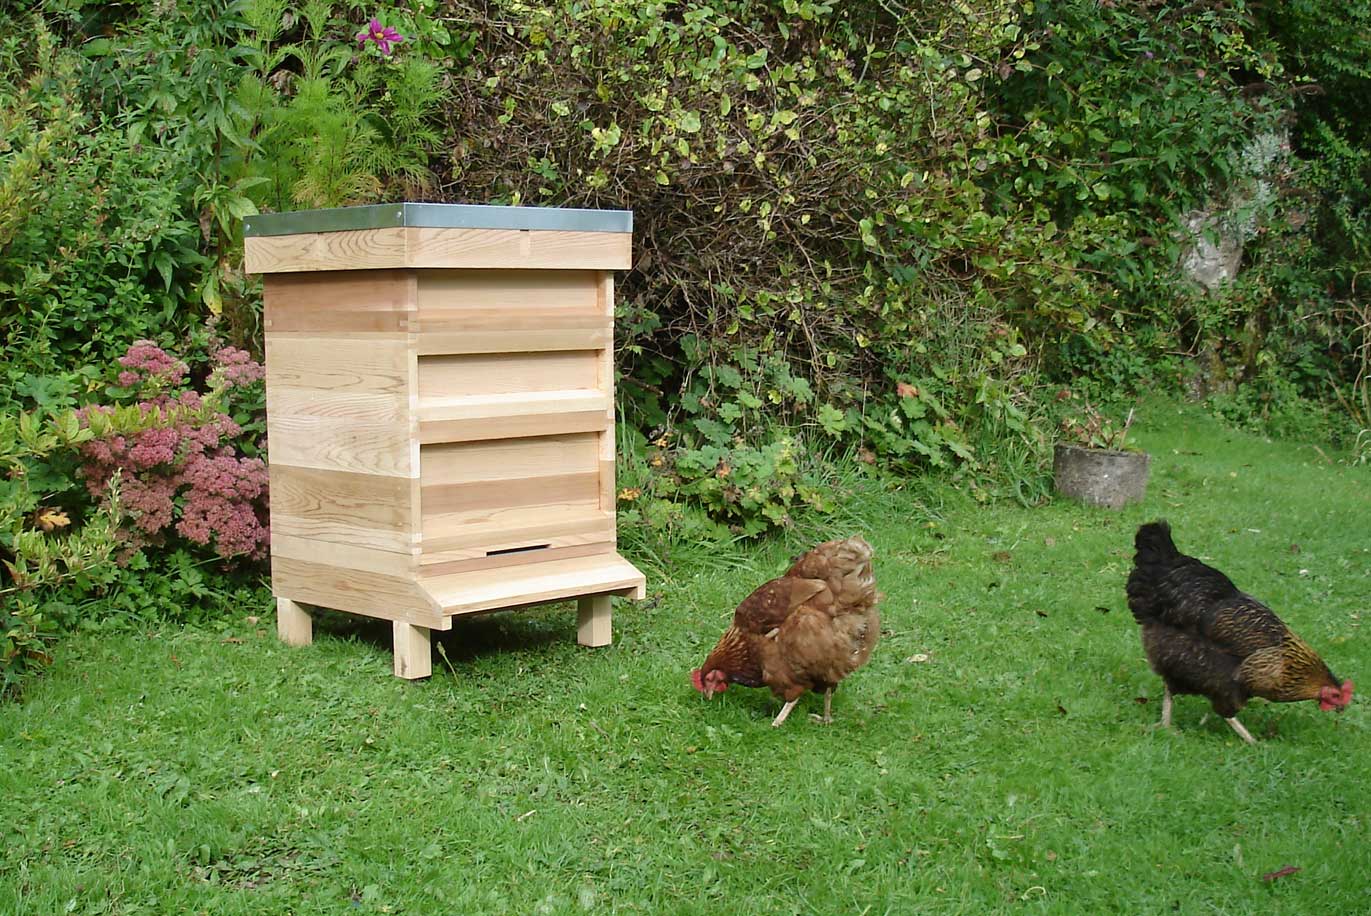 Building A Beehive Box Plans - House Design And Decorating 